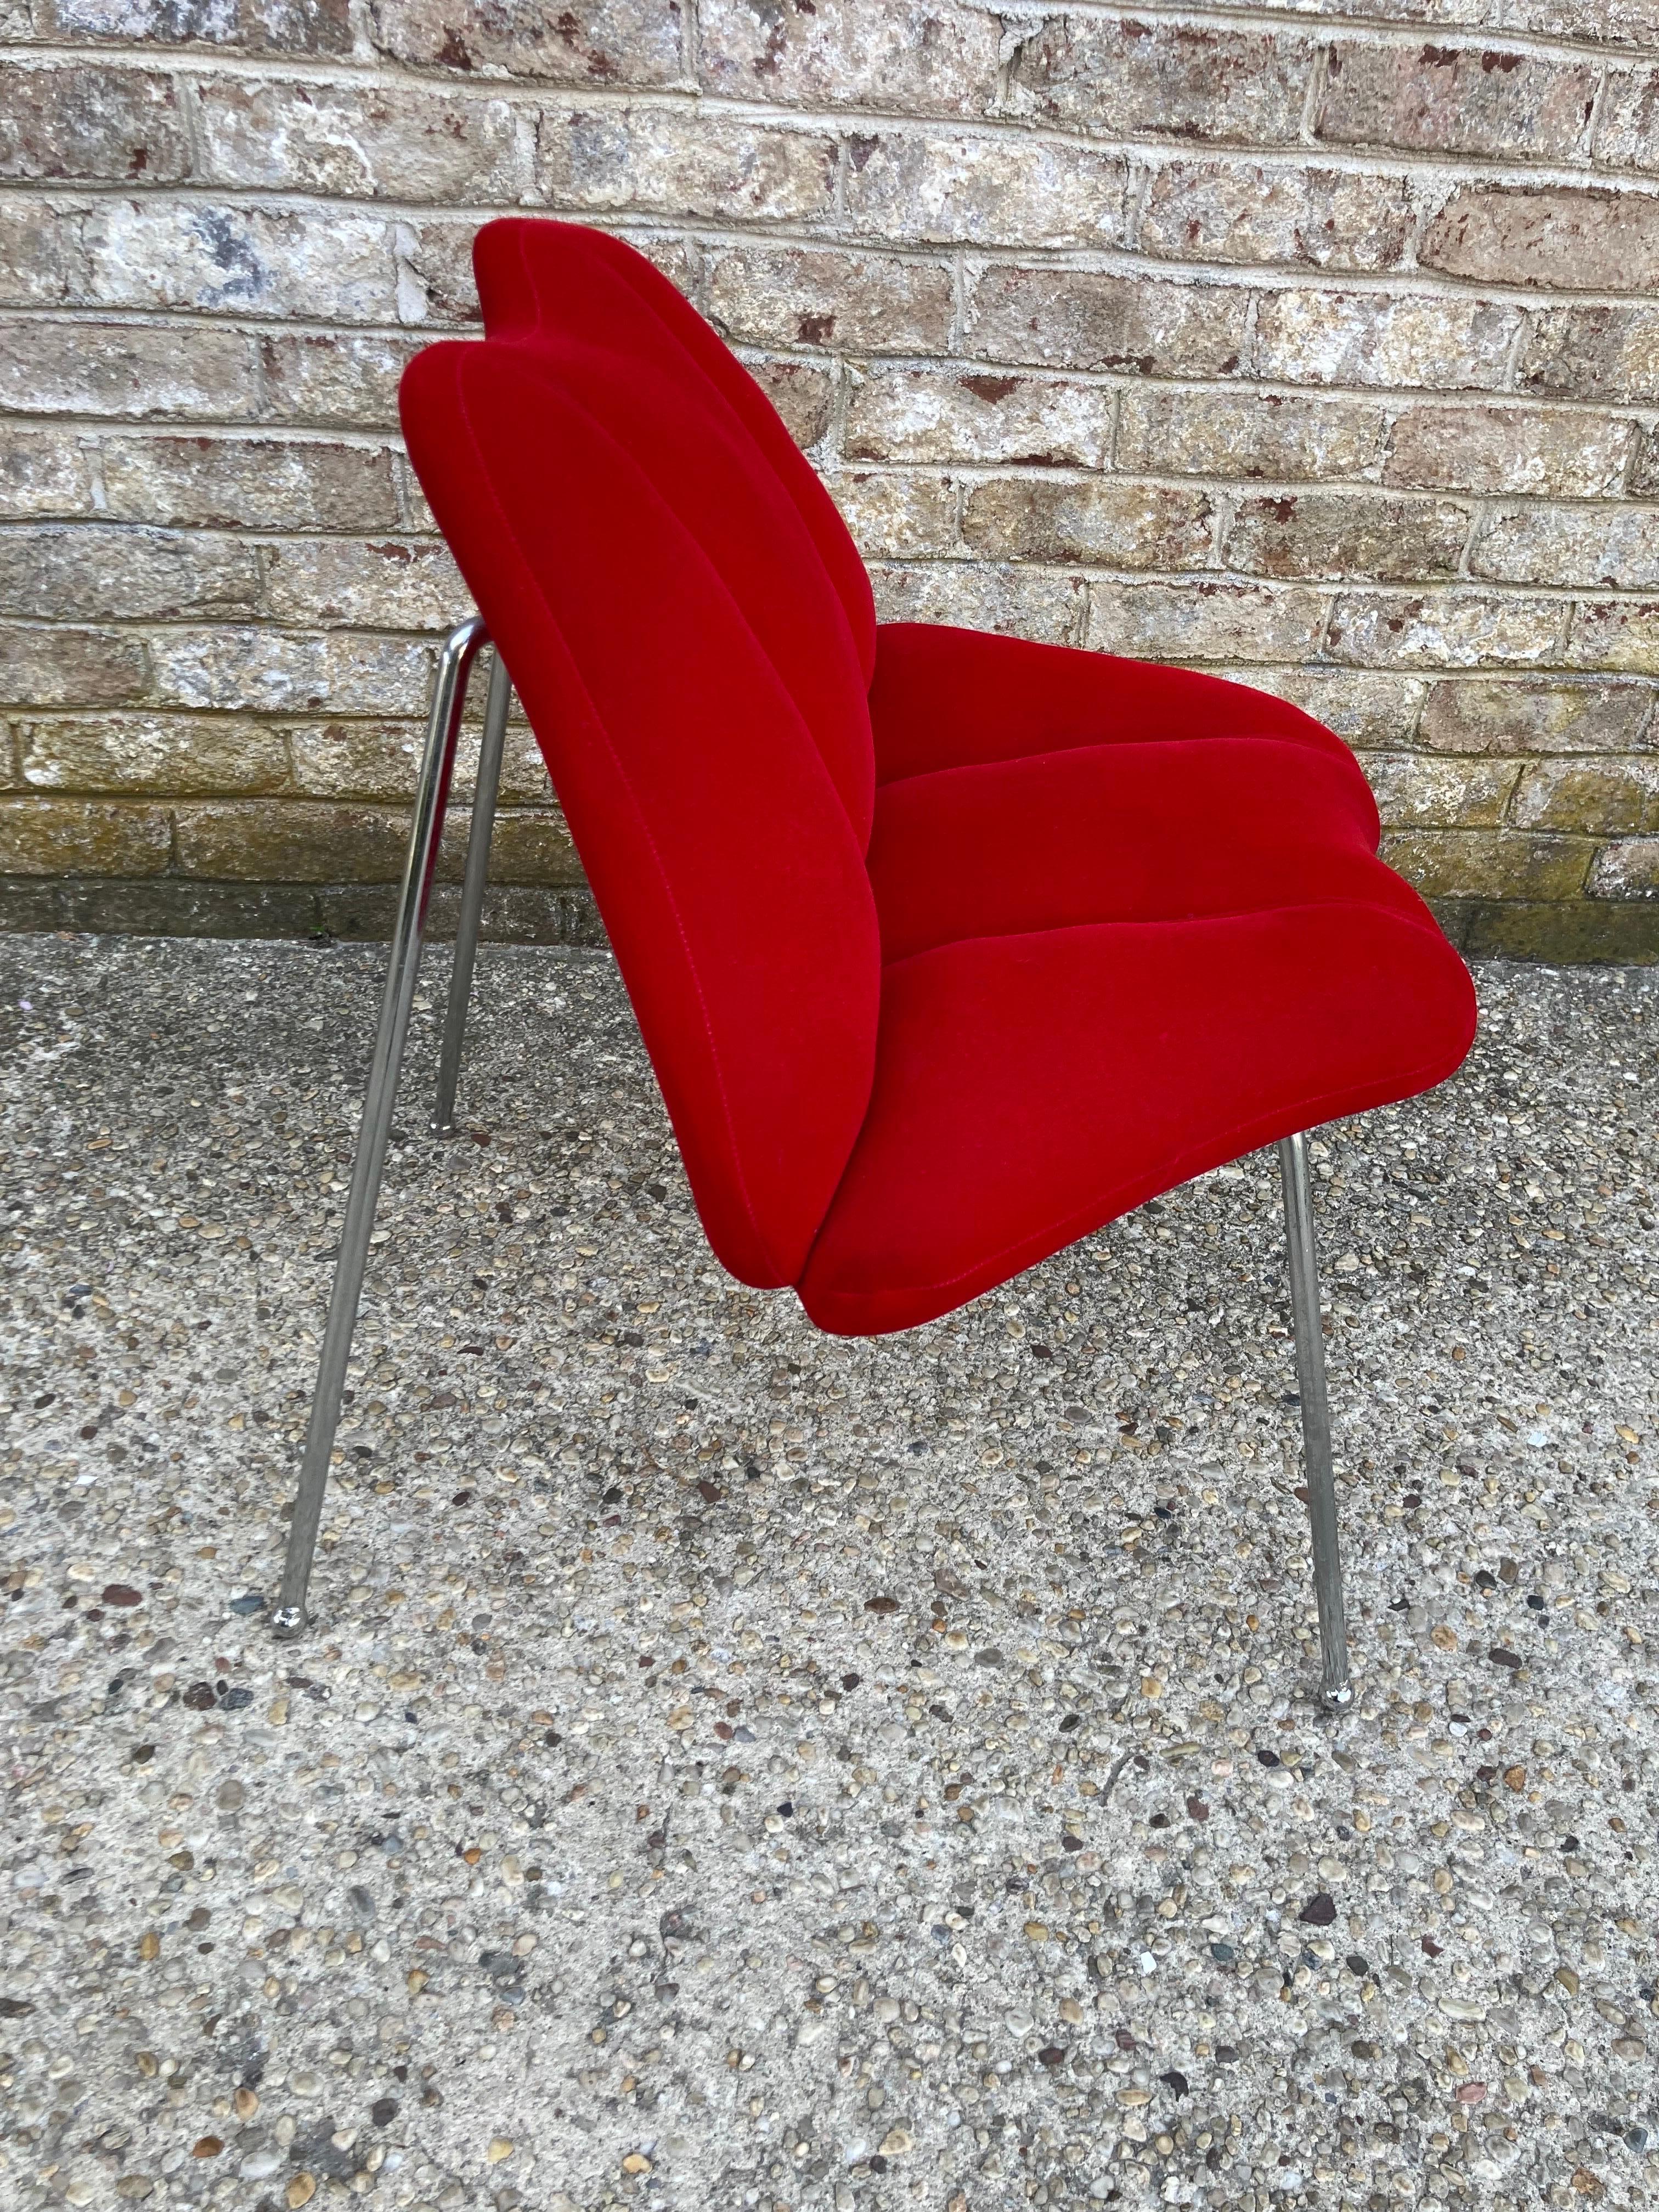 Pop Art lips chair.... Italian with chrome base and upholstered lips seat and back....